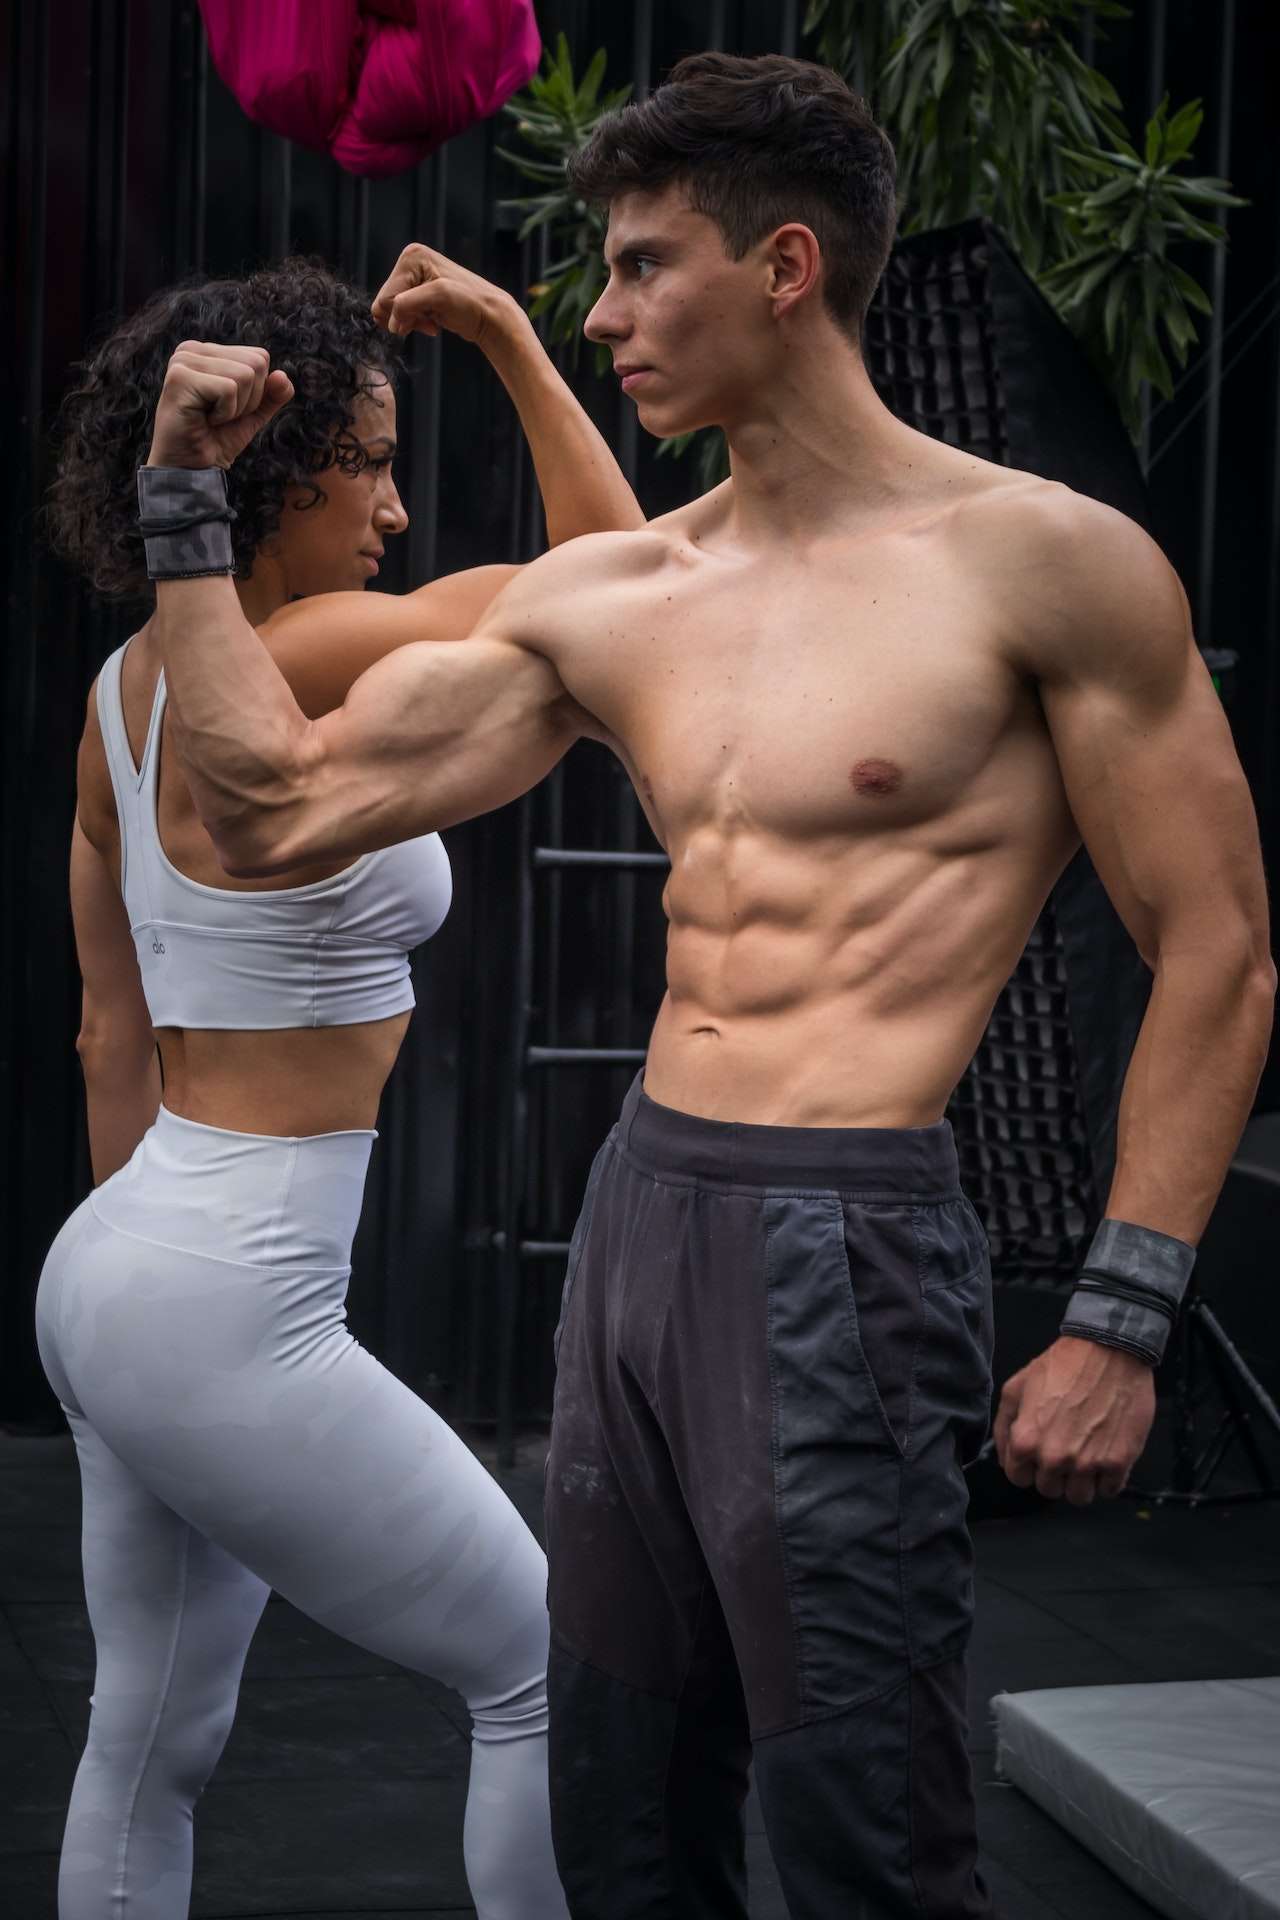 Man and Woman Flexing Their Muscles 